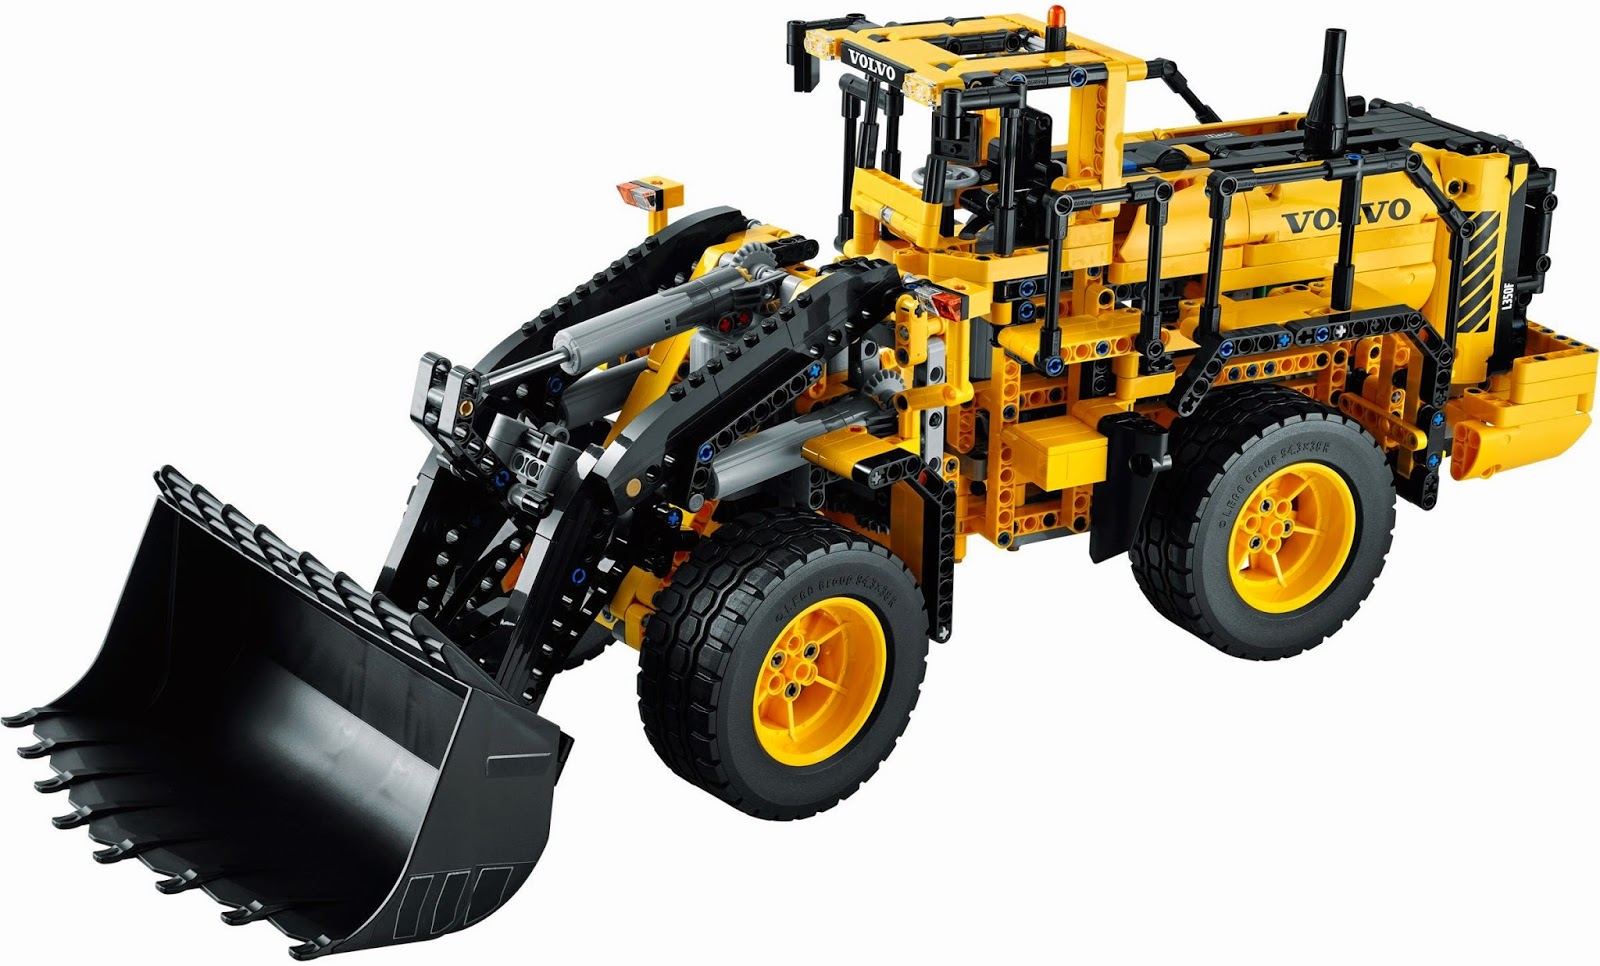 COMPETITION: Win LEGO Technic Volvo Wheel Loader | The Test Pit